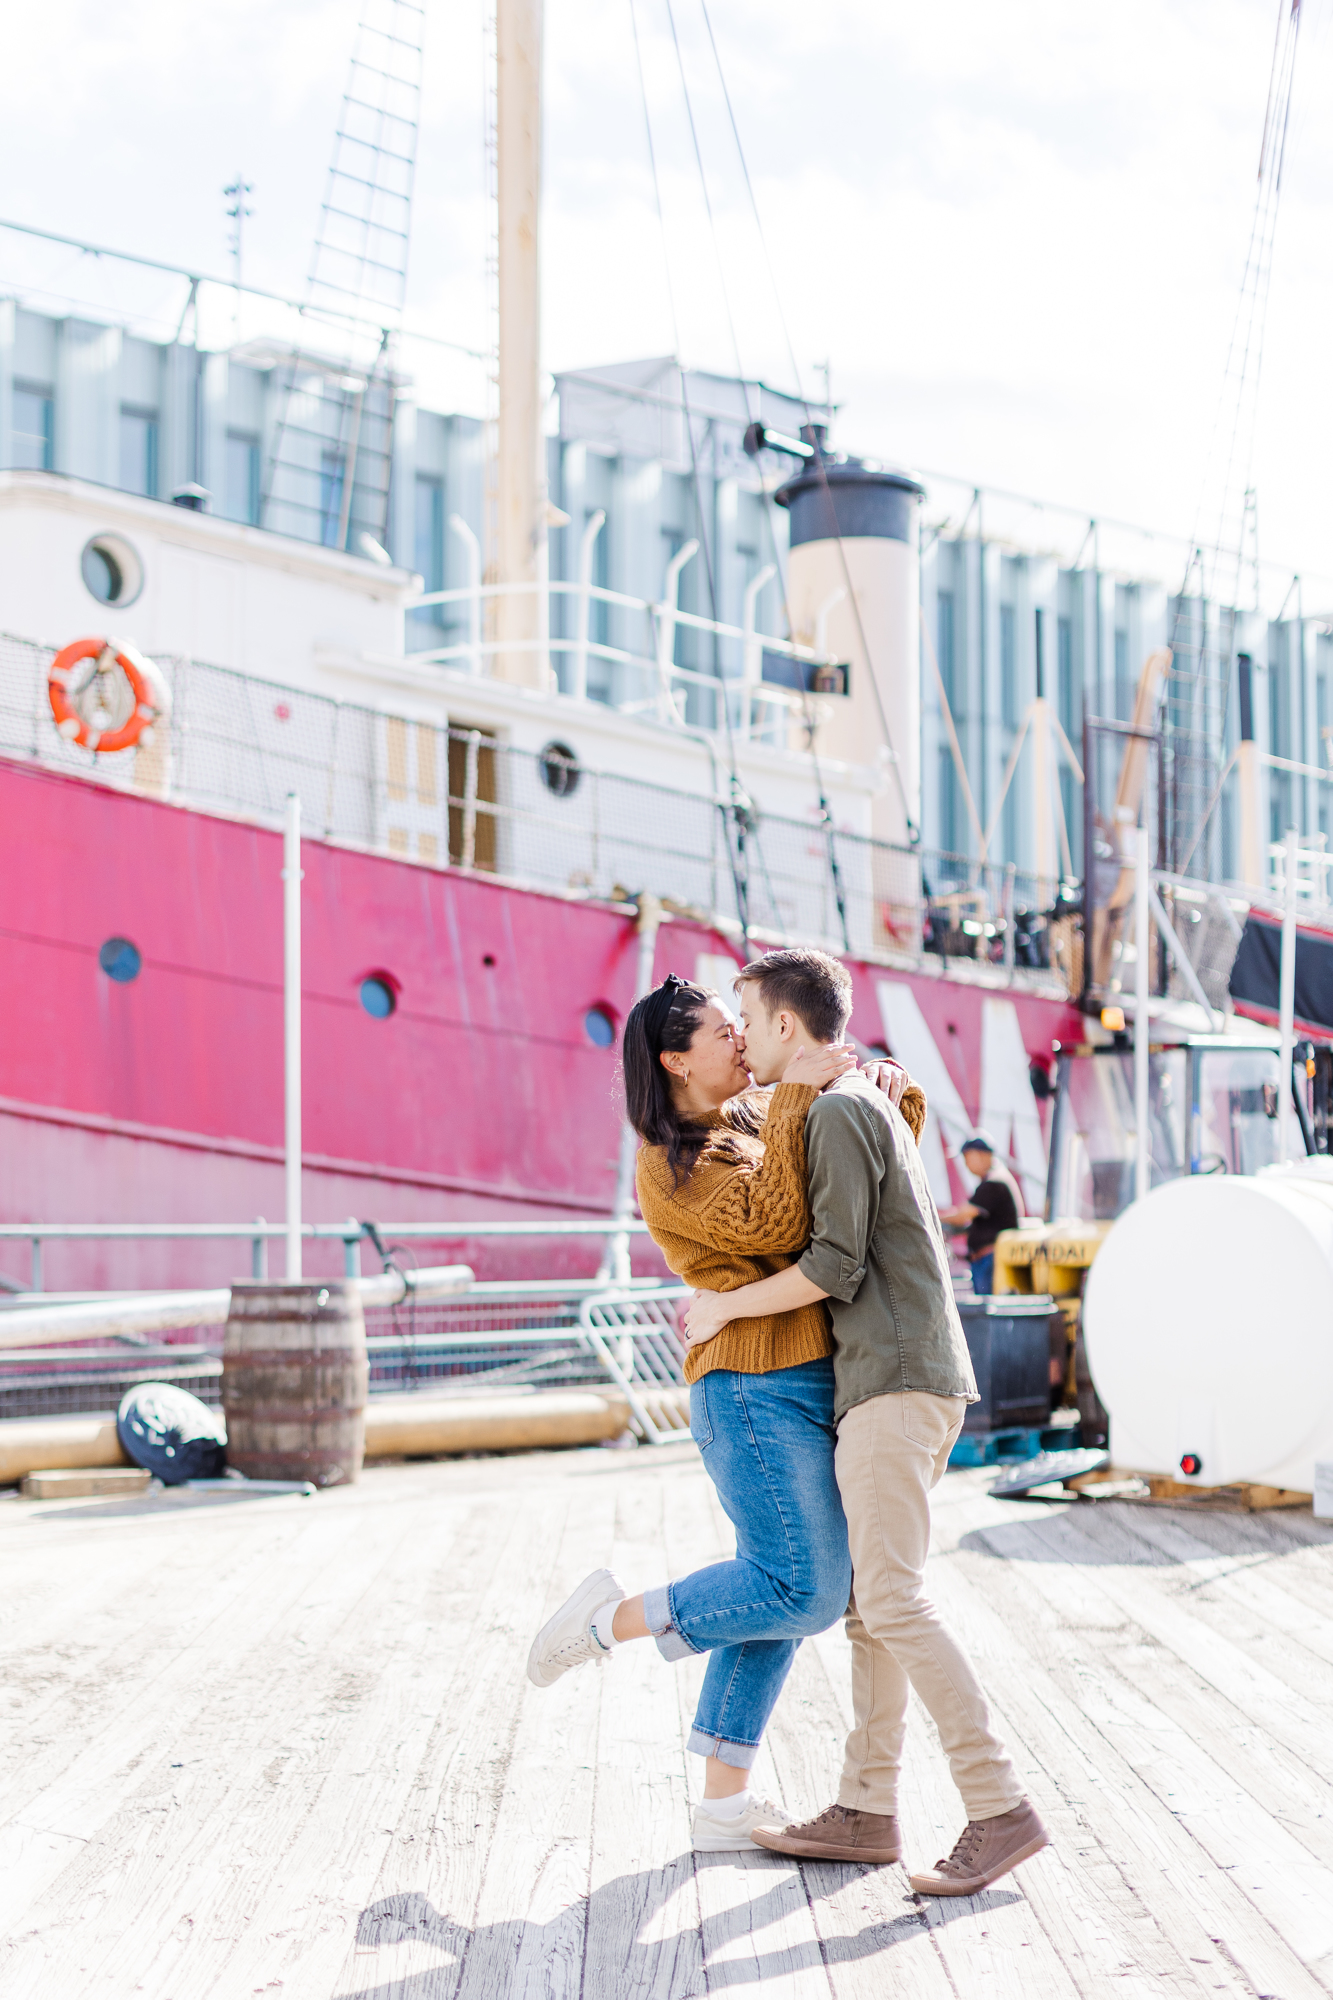 Beautiful South Street Seaport Pier 17 Engagement Photography